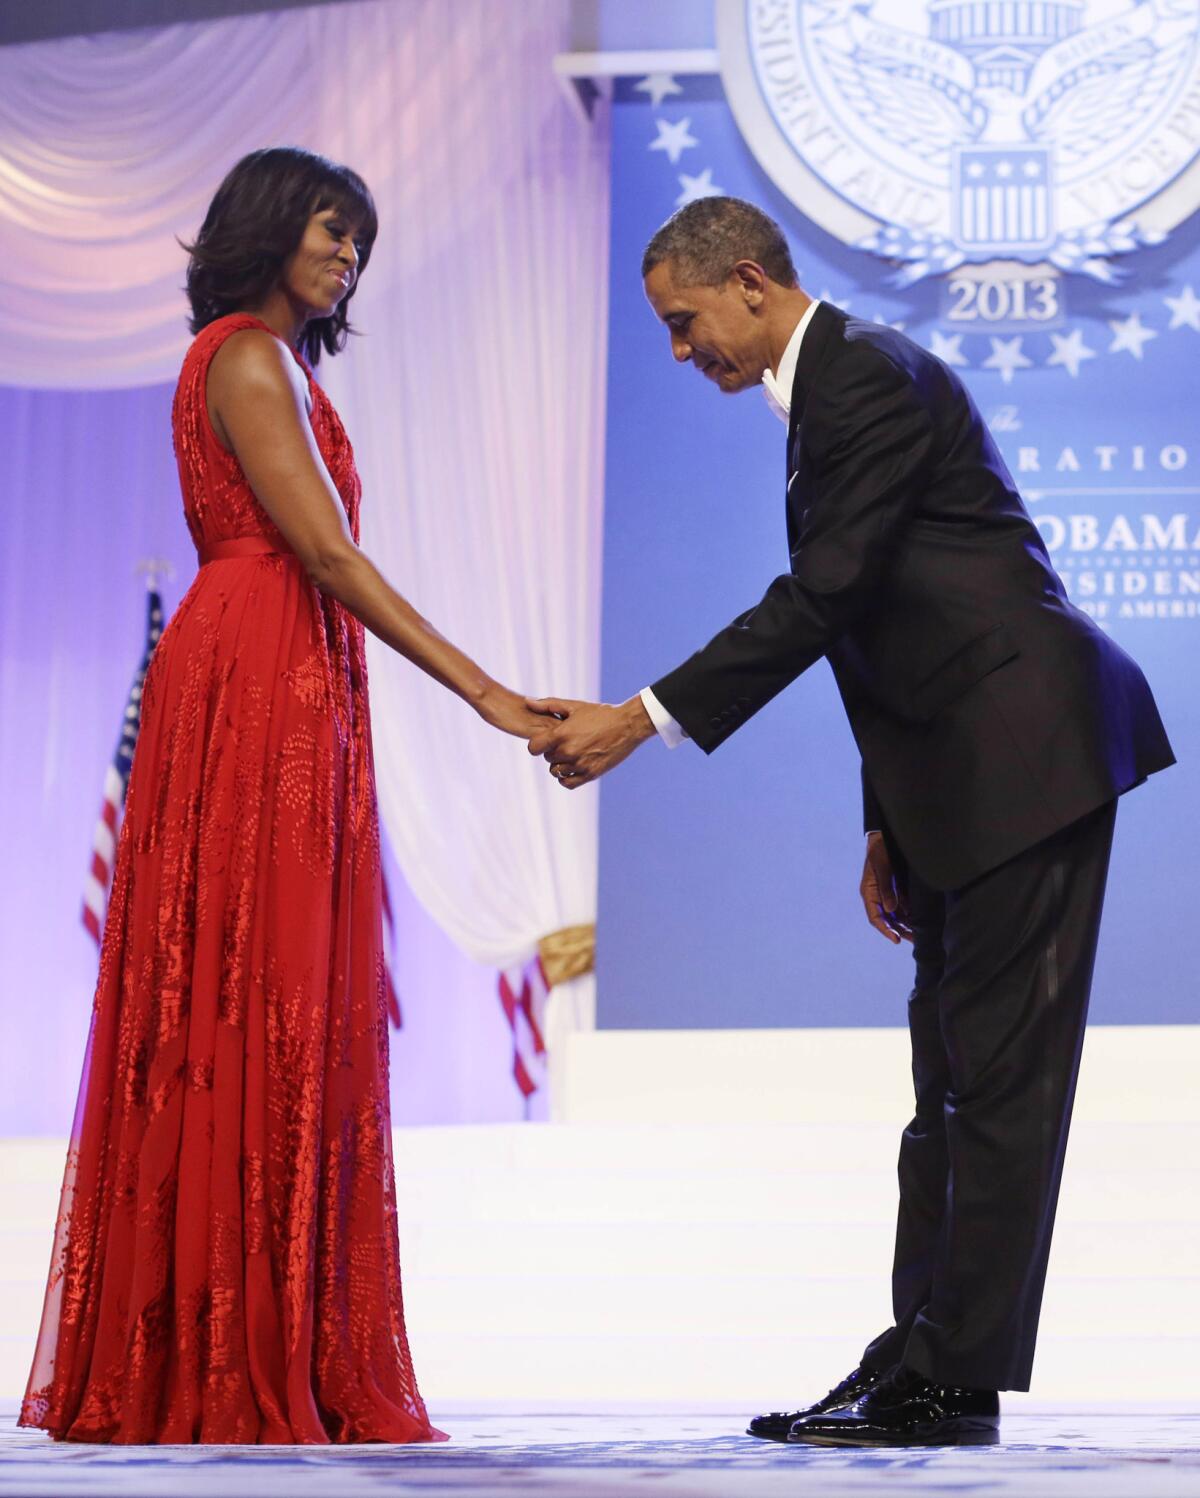 At a ball celebrating his second inauguration, President Obama bows to Michelle Obama, who is wearing the Jason Wu gown that is to be displayed at the Smithsonian Institution.